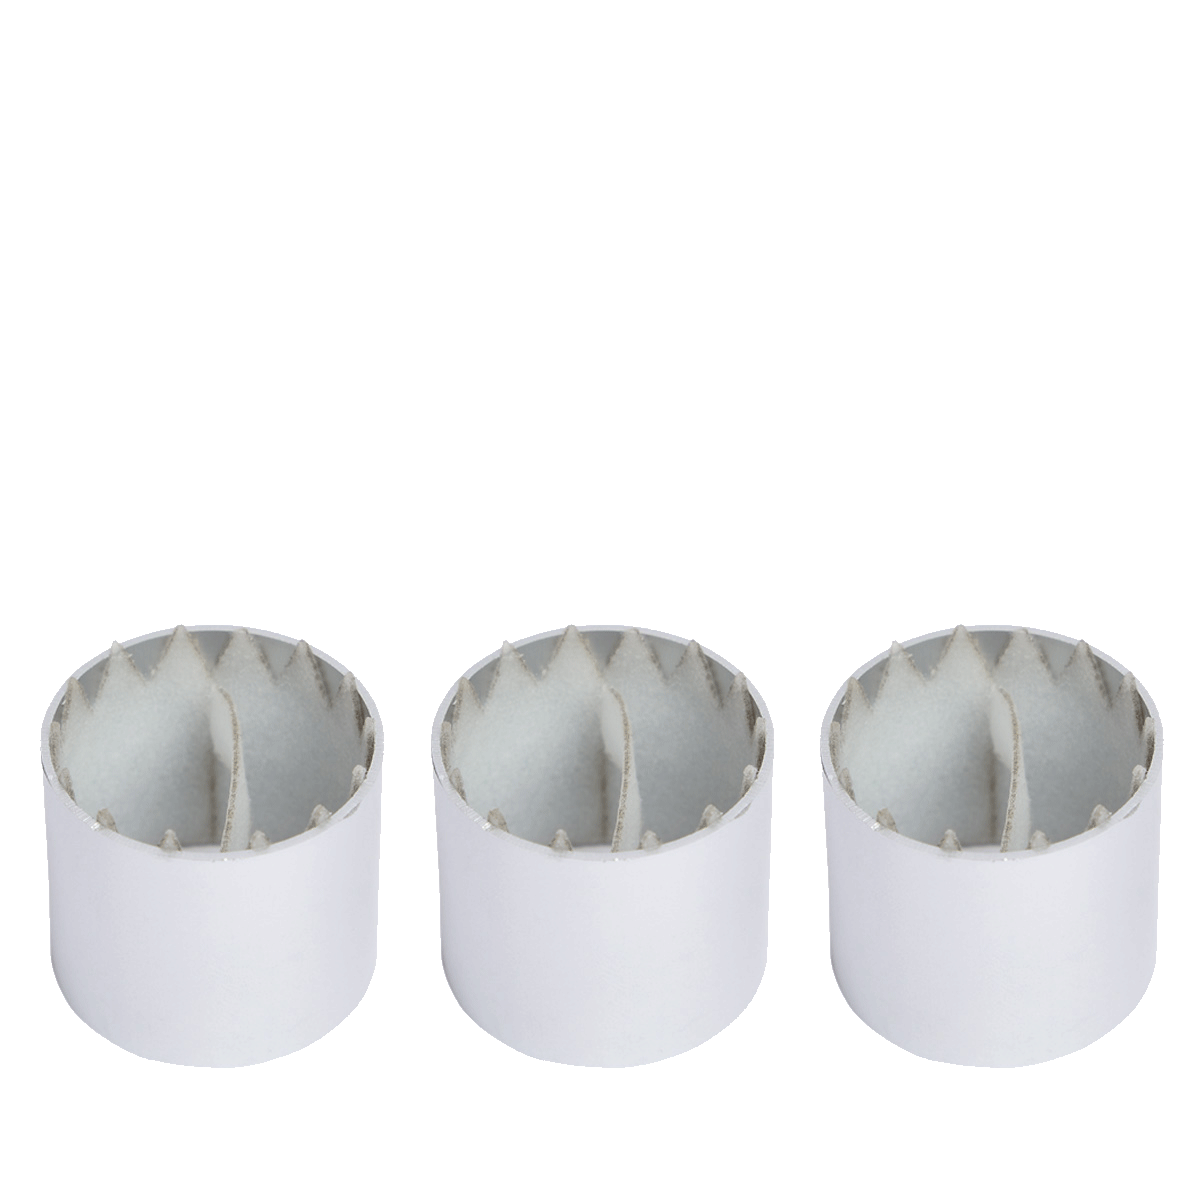 Fragrance Flame Outdoor Wick Refill set of 3 - PartyLite US